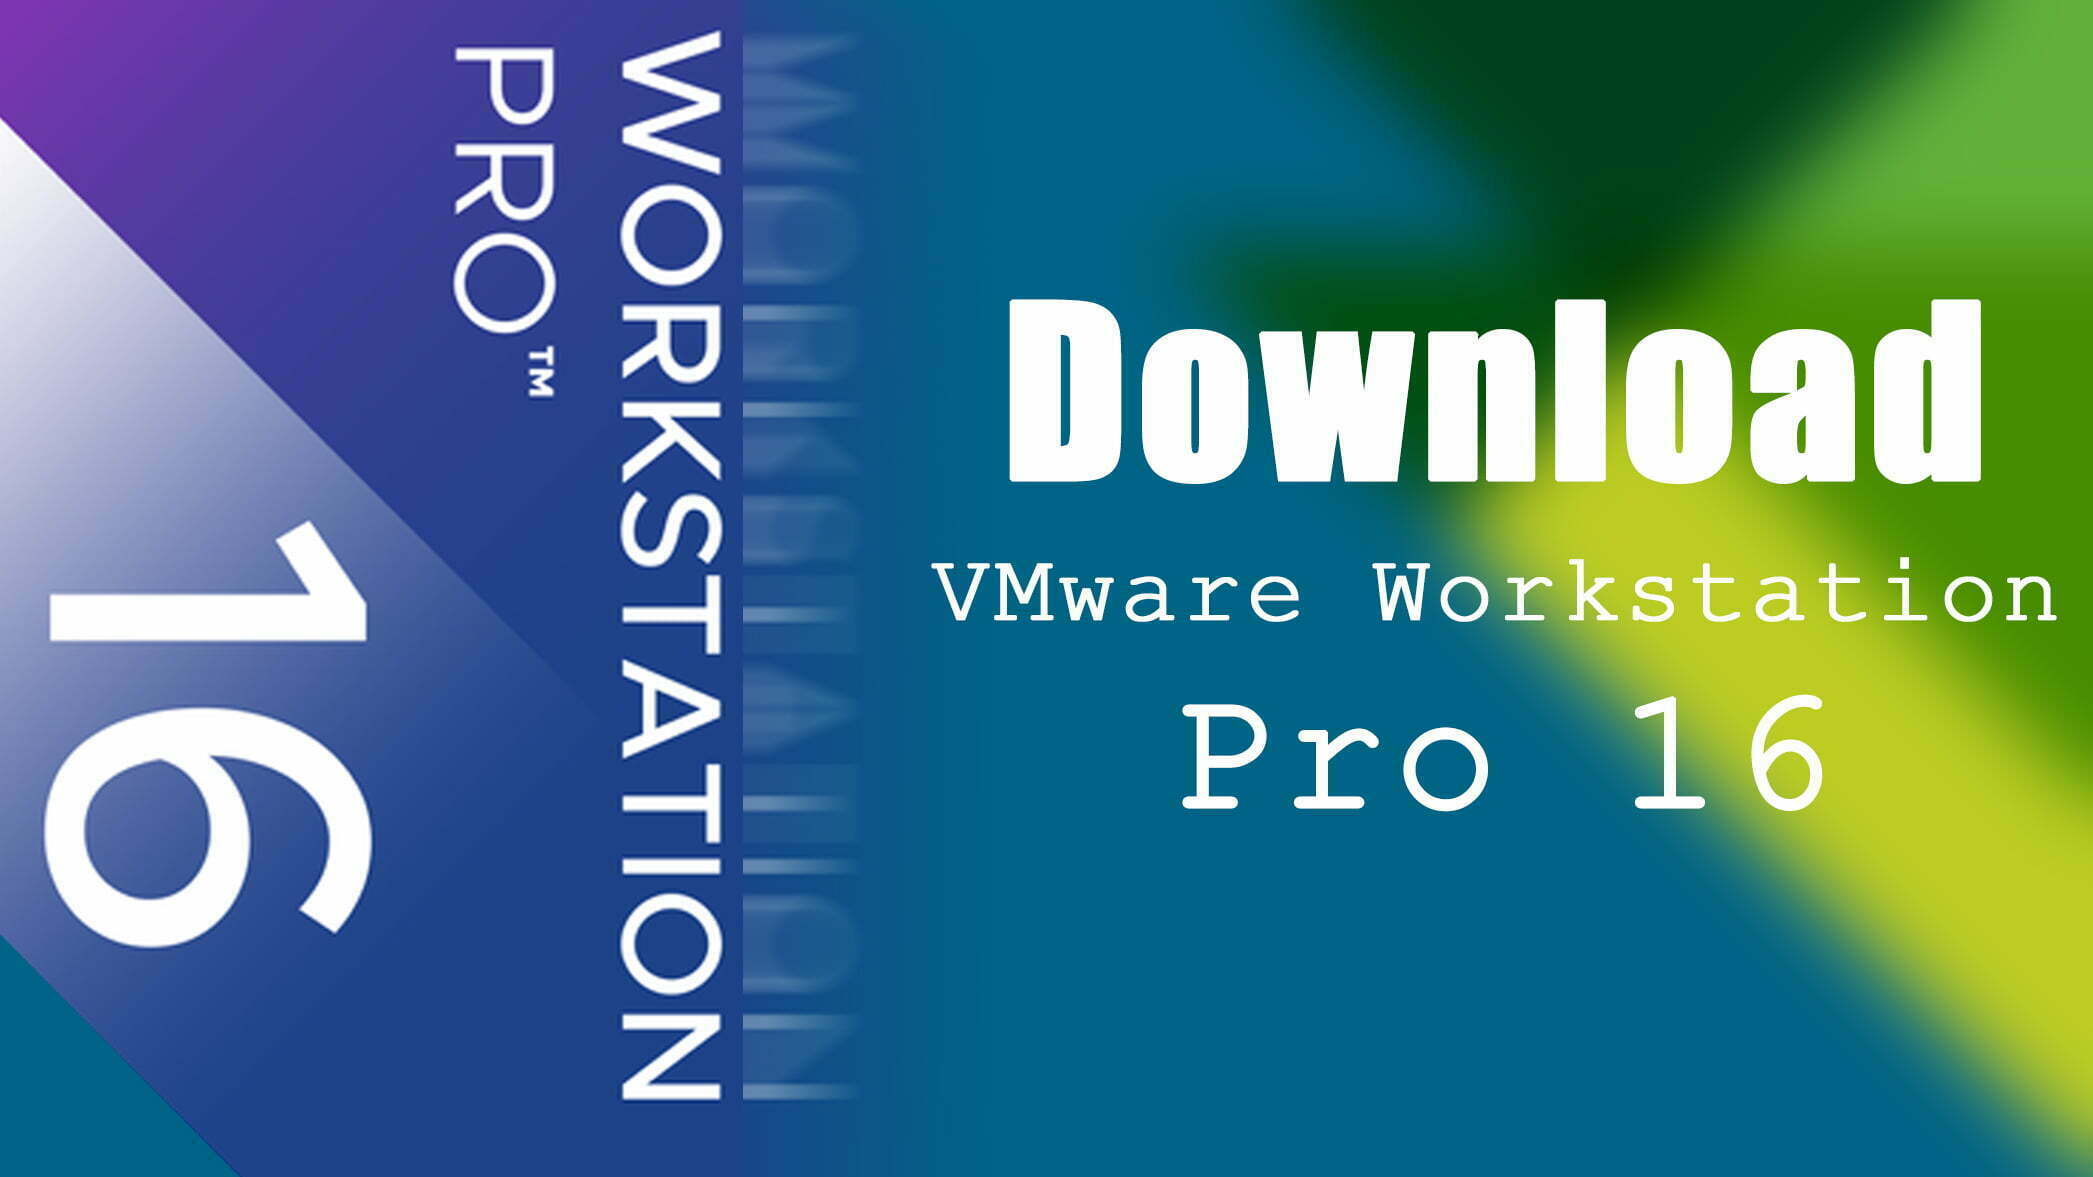 vmware workstation 16 pro free download full version with key